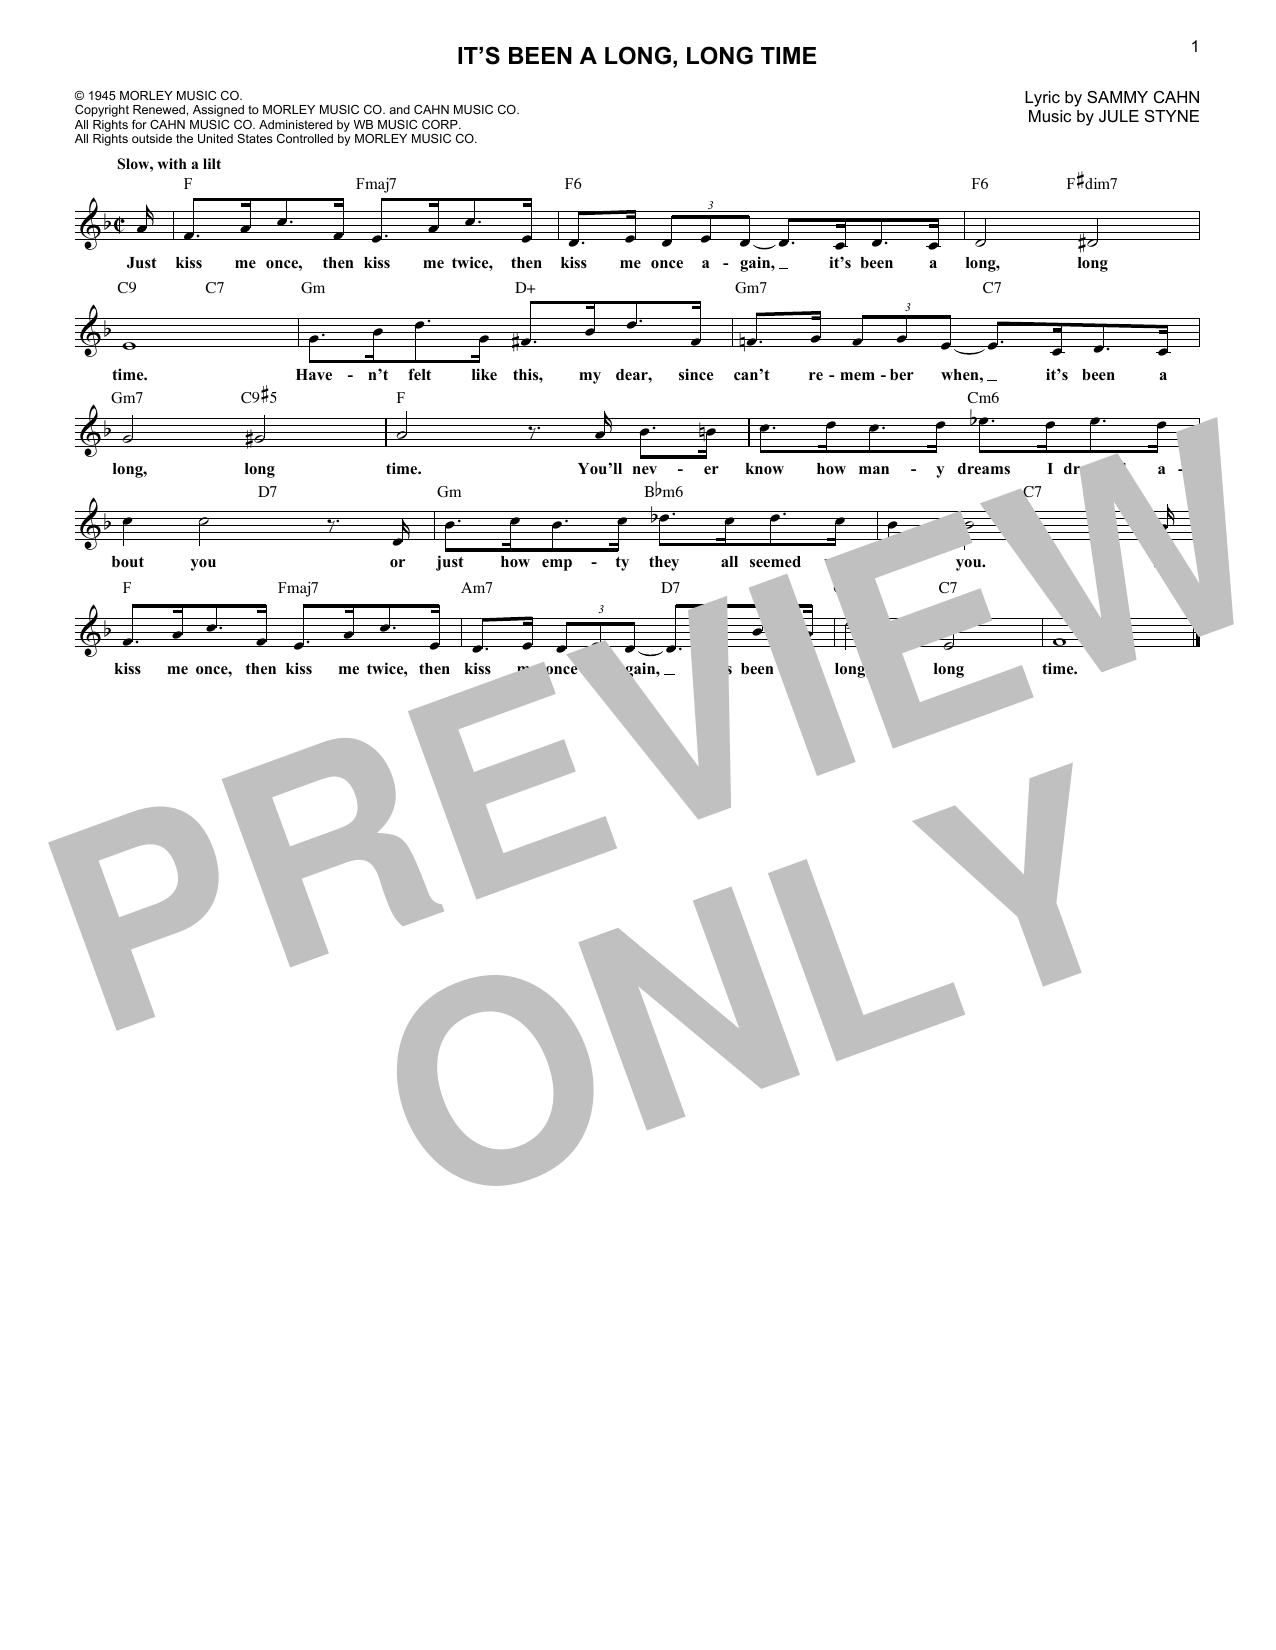 Download Jule Styne and Sammy Cahn It's Been A Long, Long Time Sheet Music